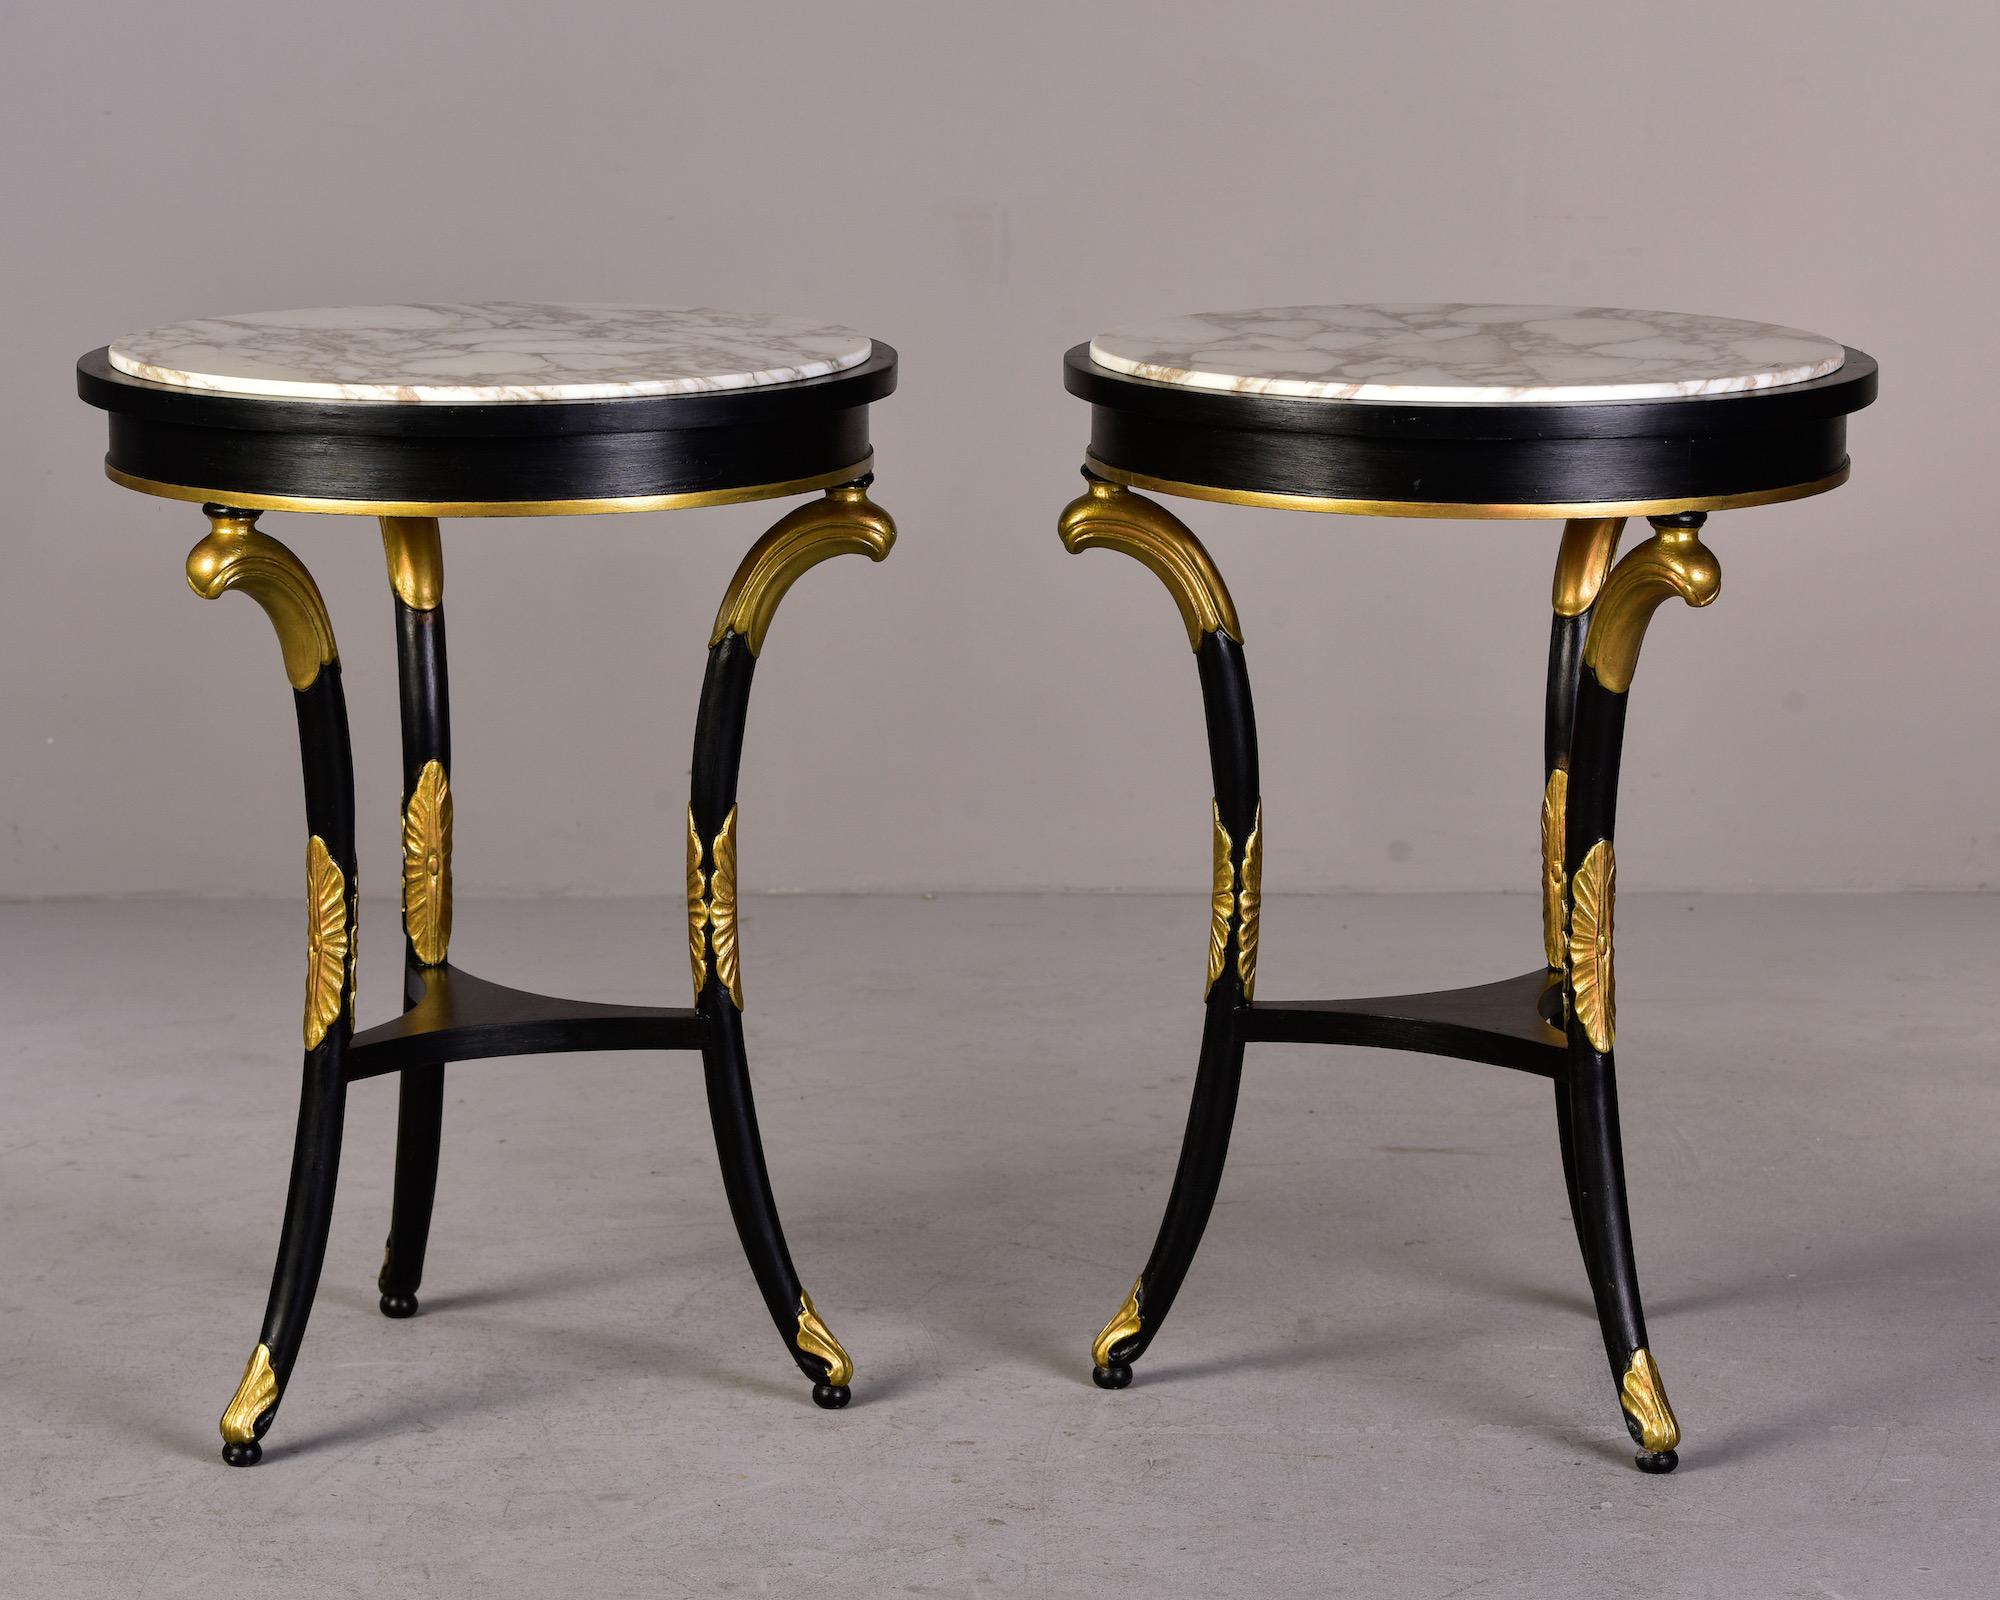 English Pair Late 19th C Regency Ebonised Tables with Gilt Wood Fittings and Marble Tops For Sale